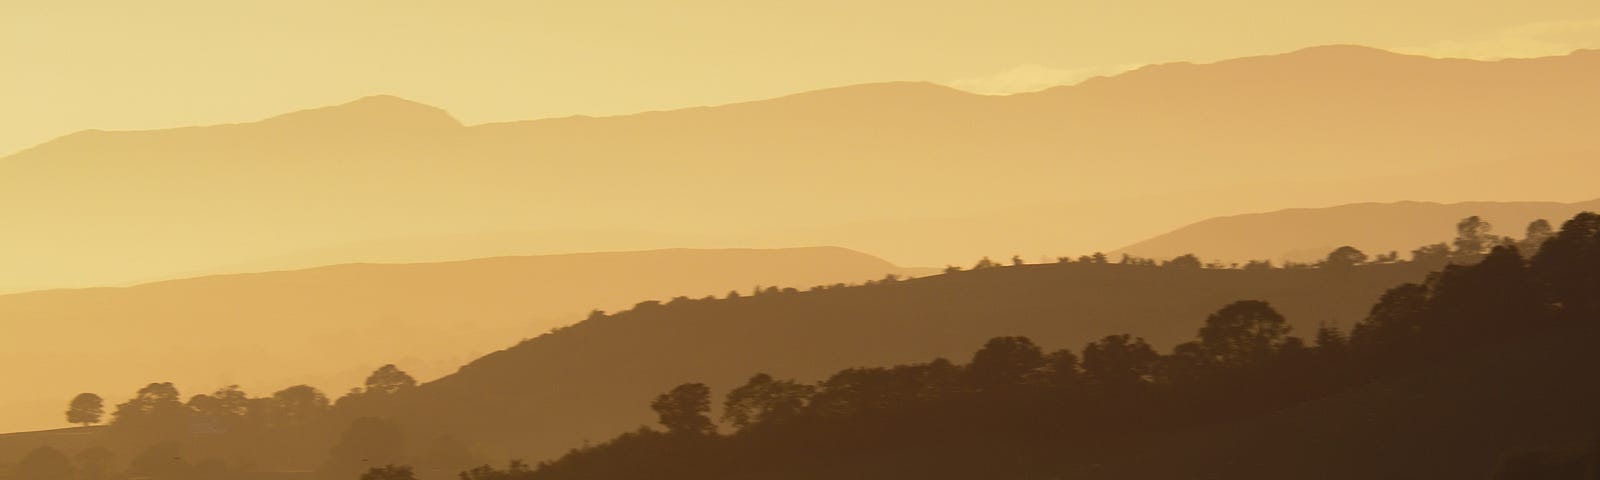 A view across the Welsh Hills from the Kerry Ridgeway towards Snowdonia in graduated sepia tones.